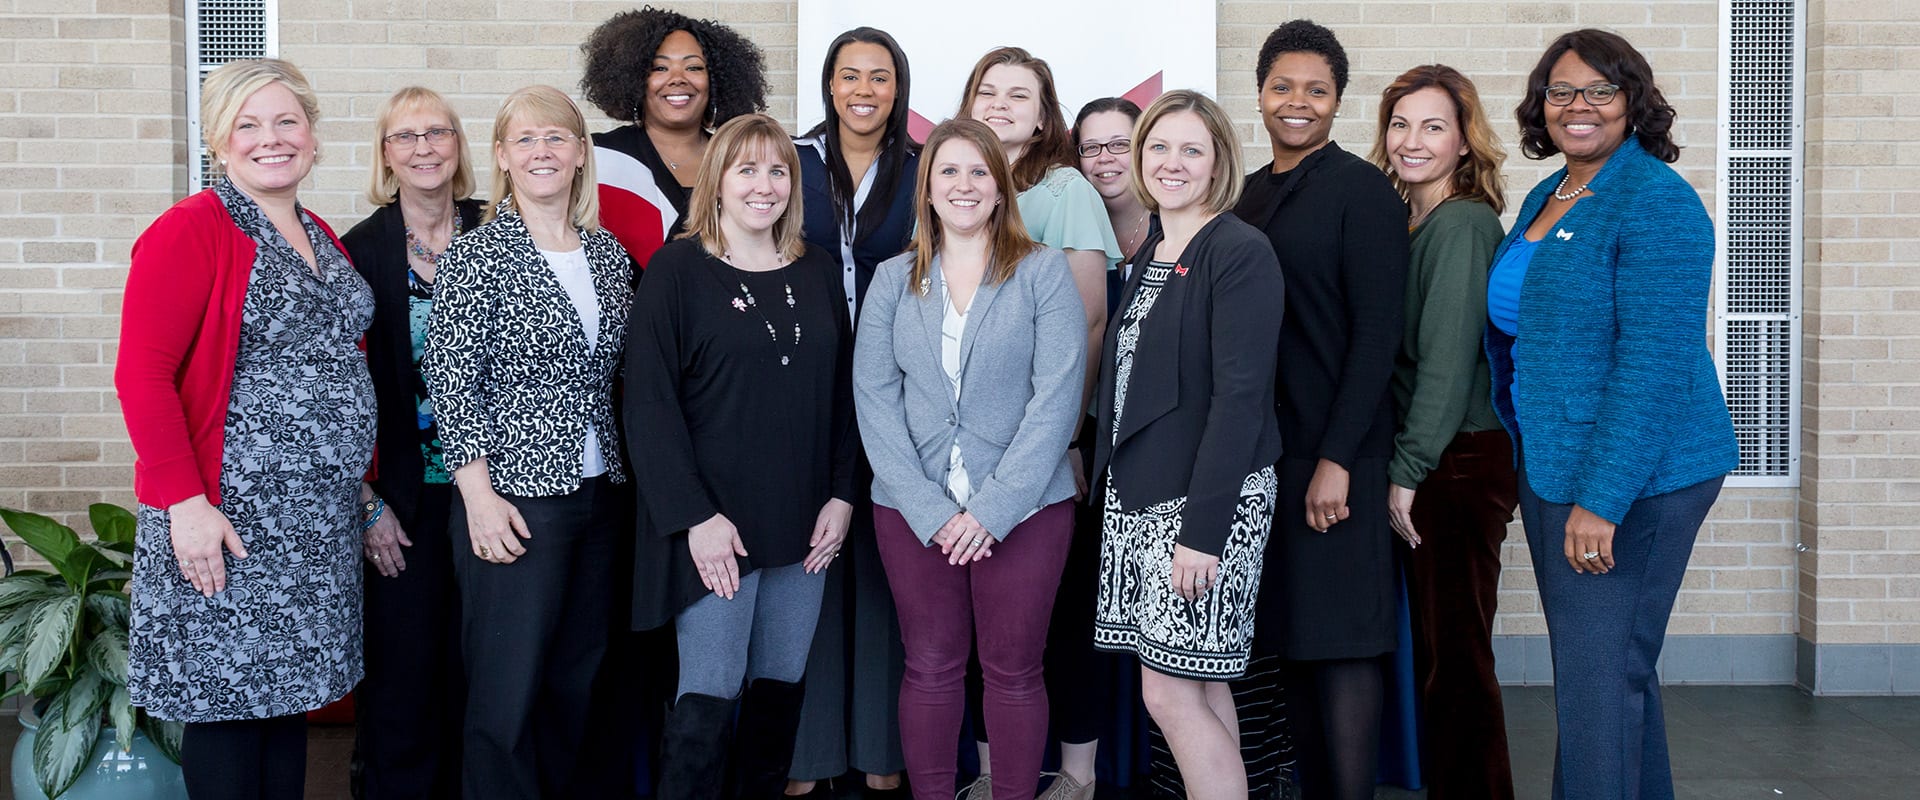 Women and Leadership Empowering Women on Campus